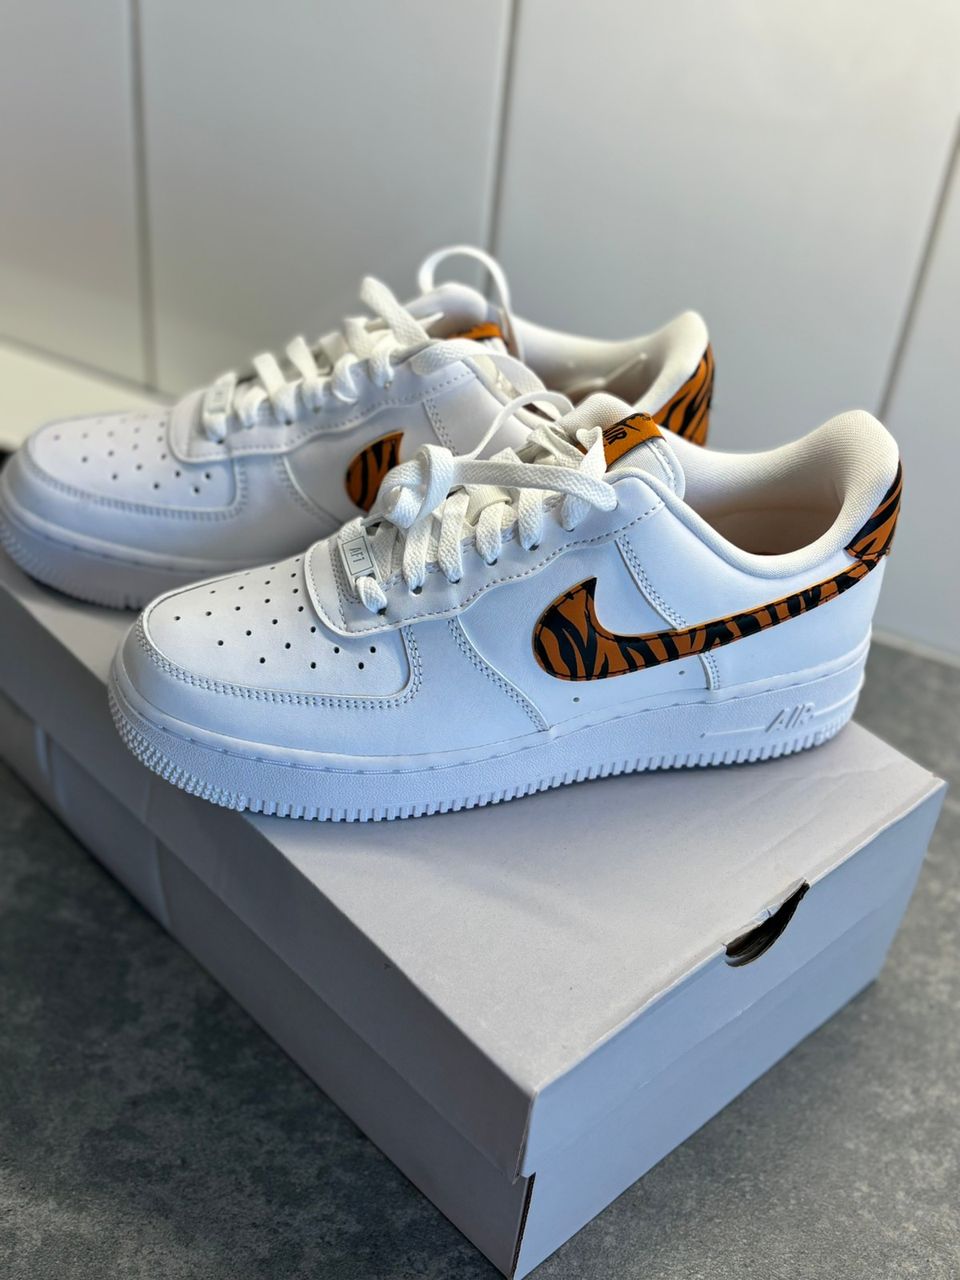 New airforce 1 size 39